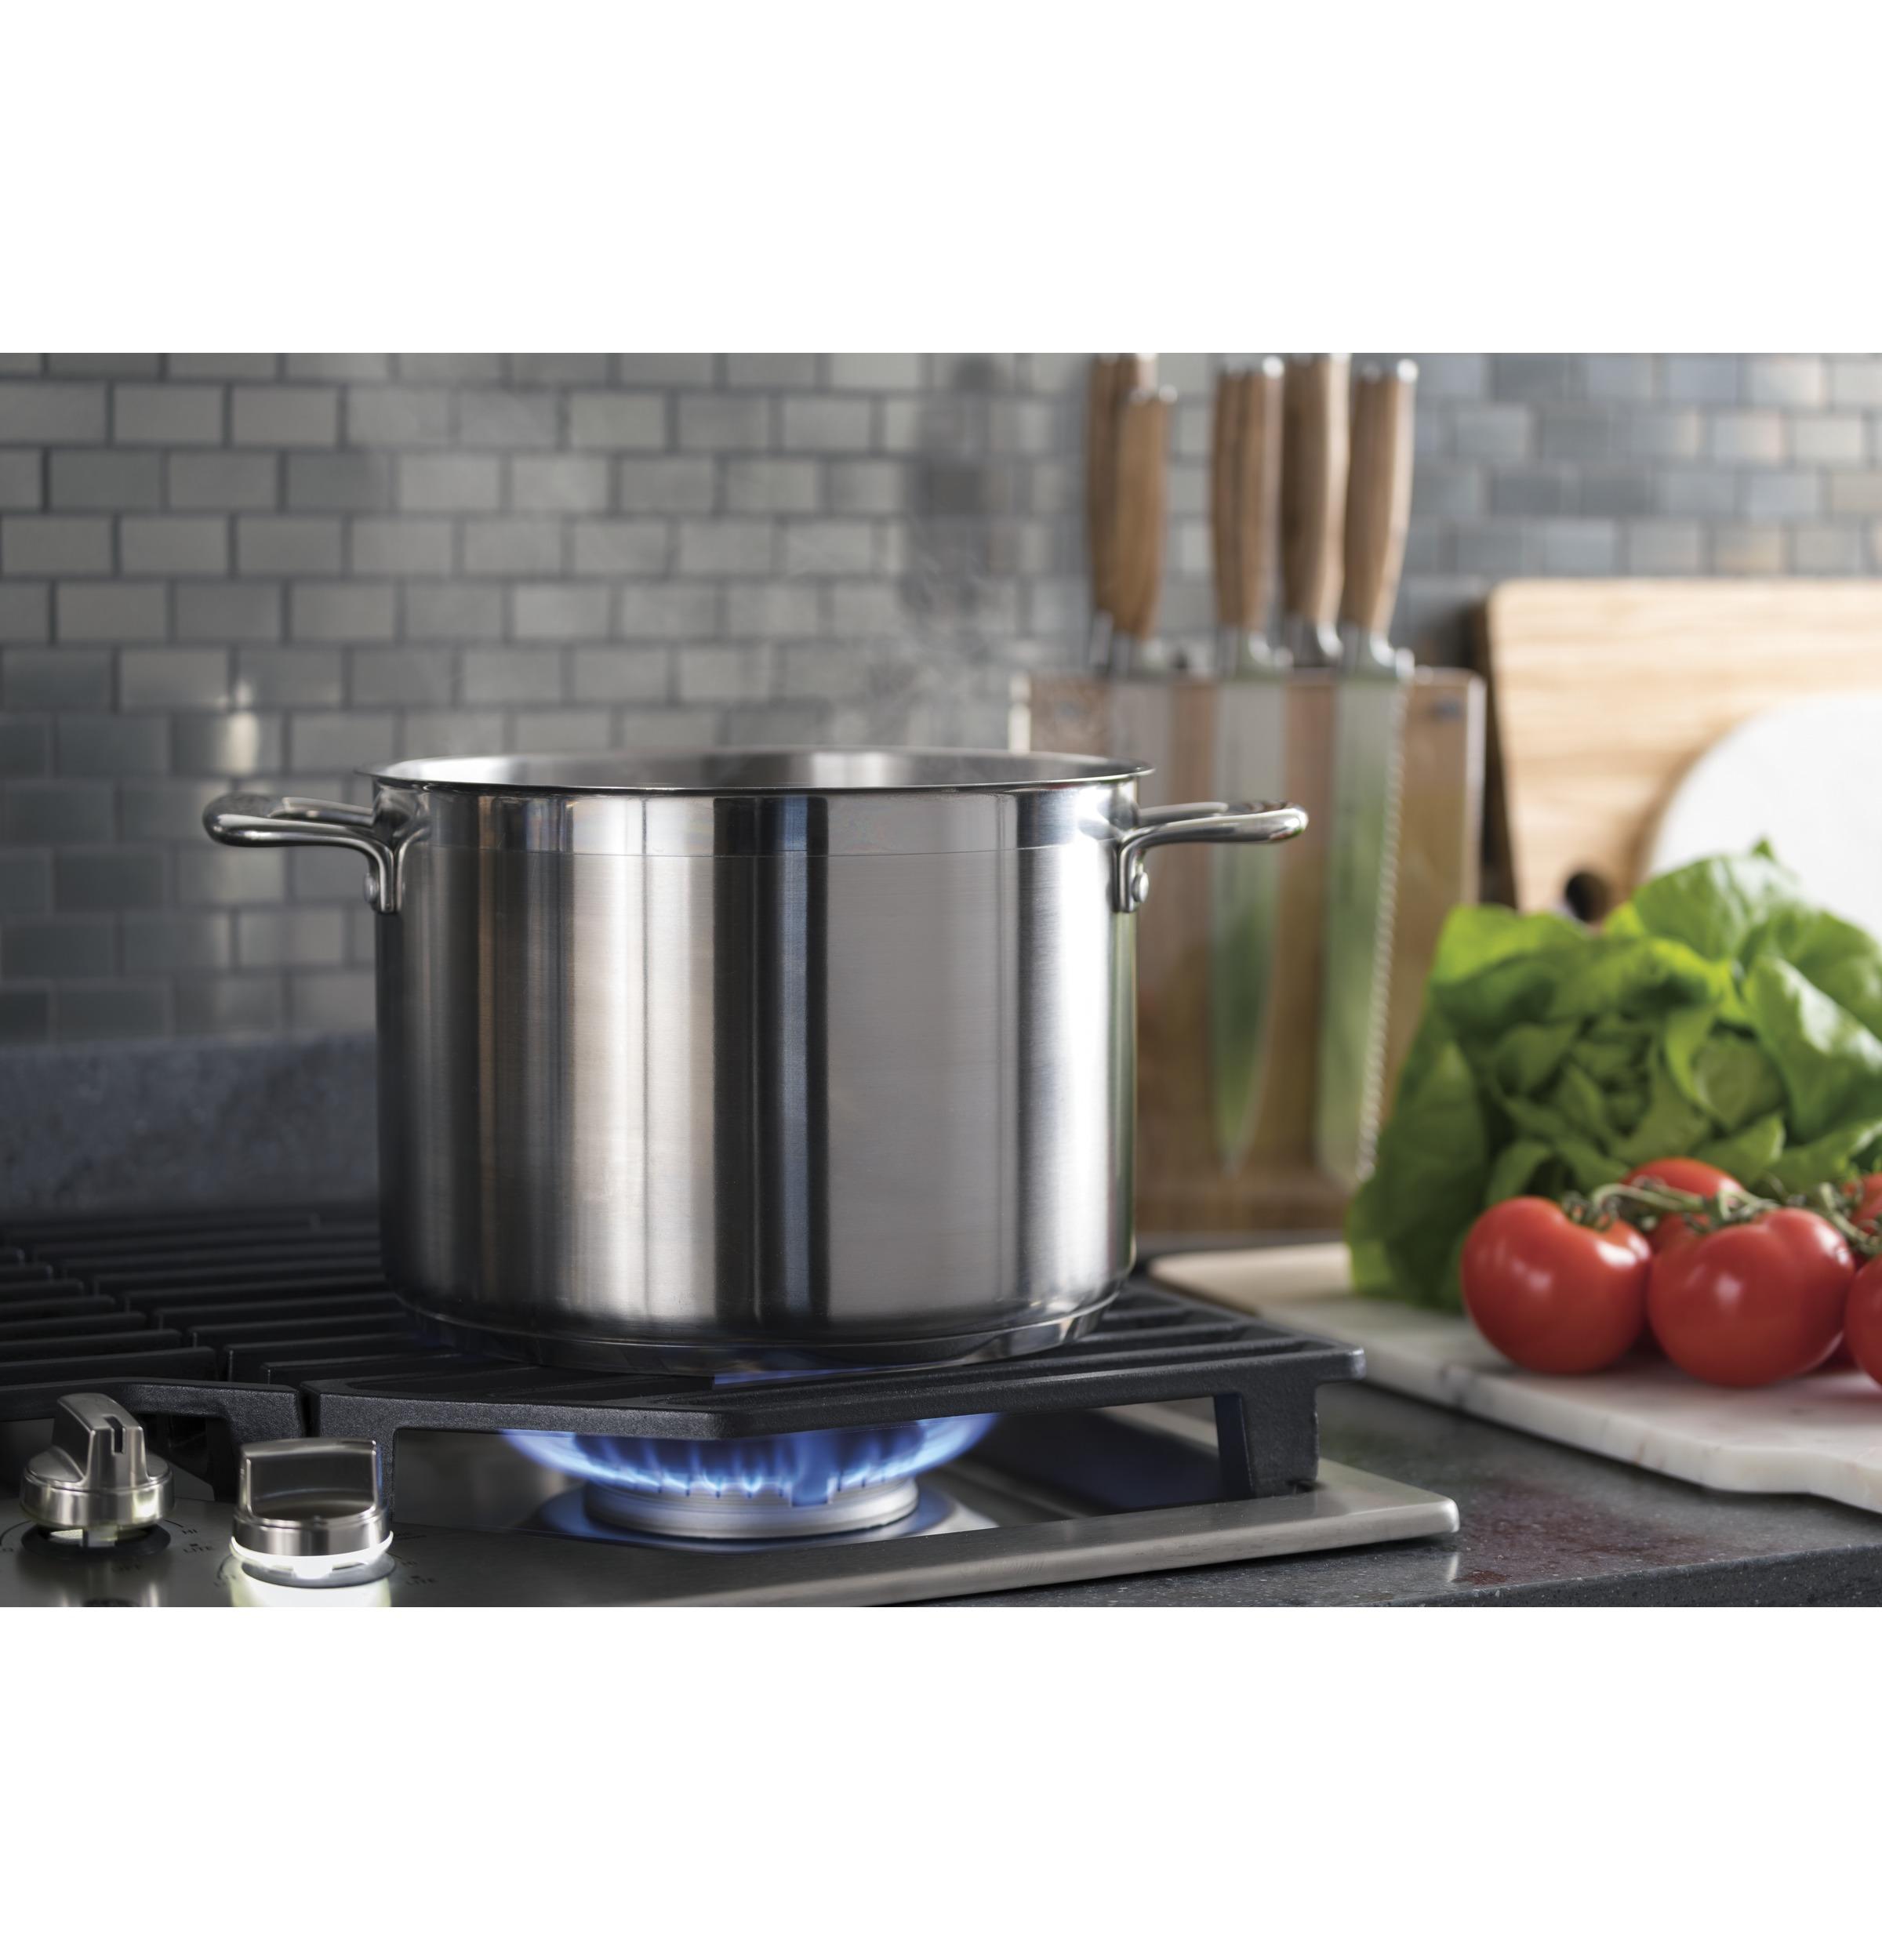 GE Profile™ 36" Built-In Tri-Ring Gas Cooktop with 5 Burners and Included Extra-Large Integrated Griddle